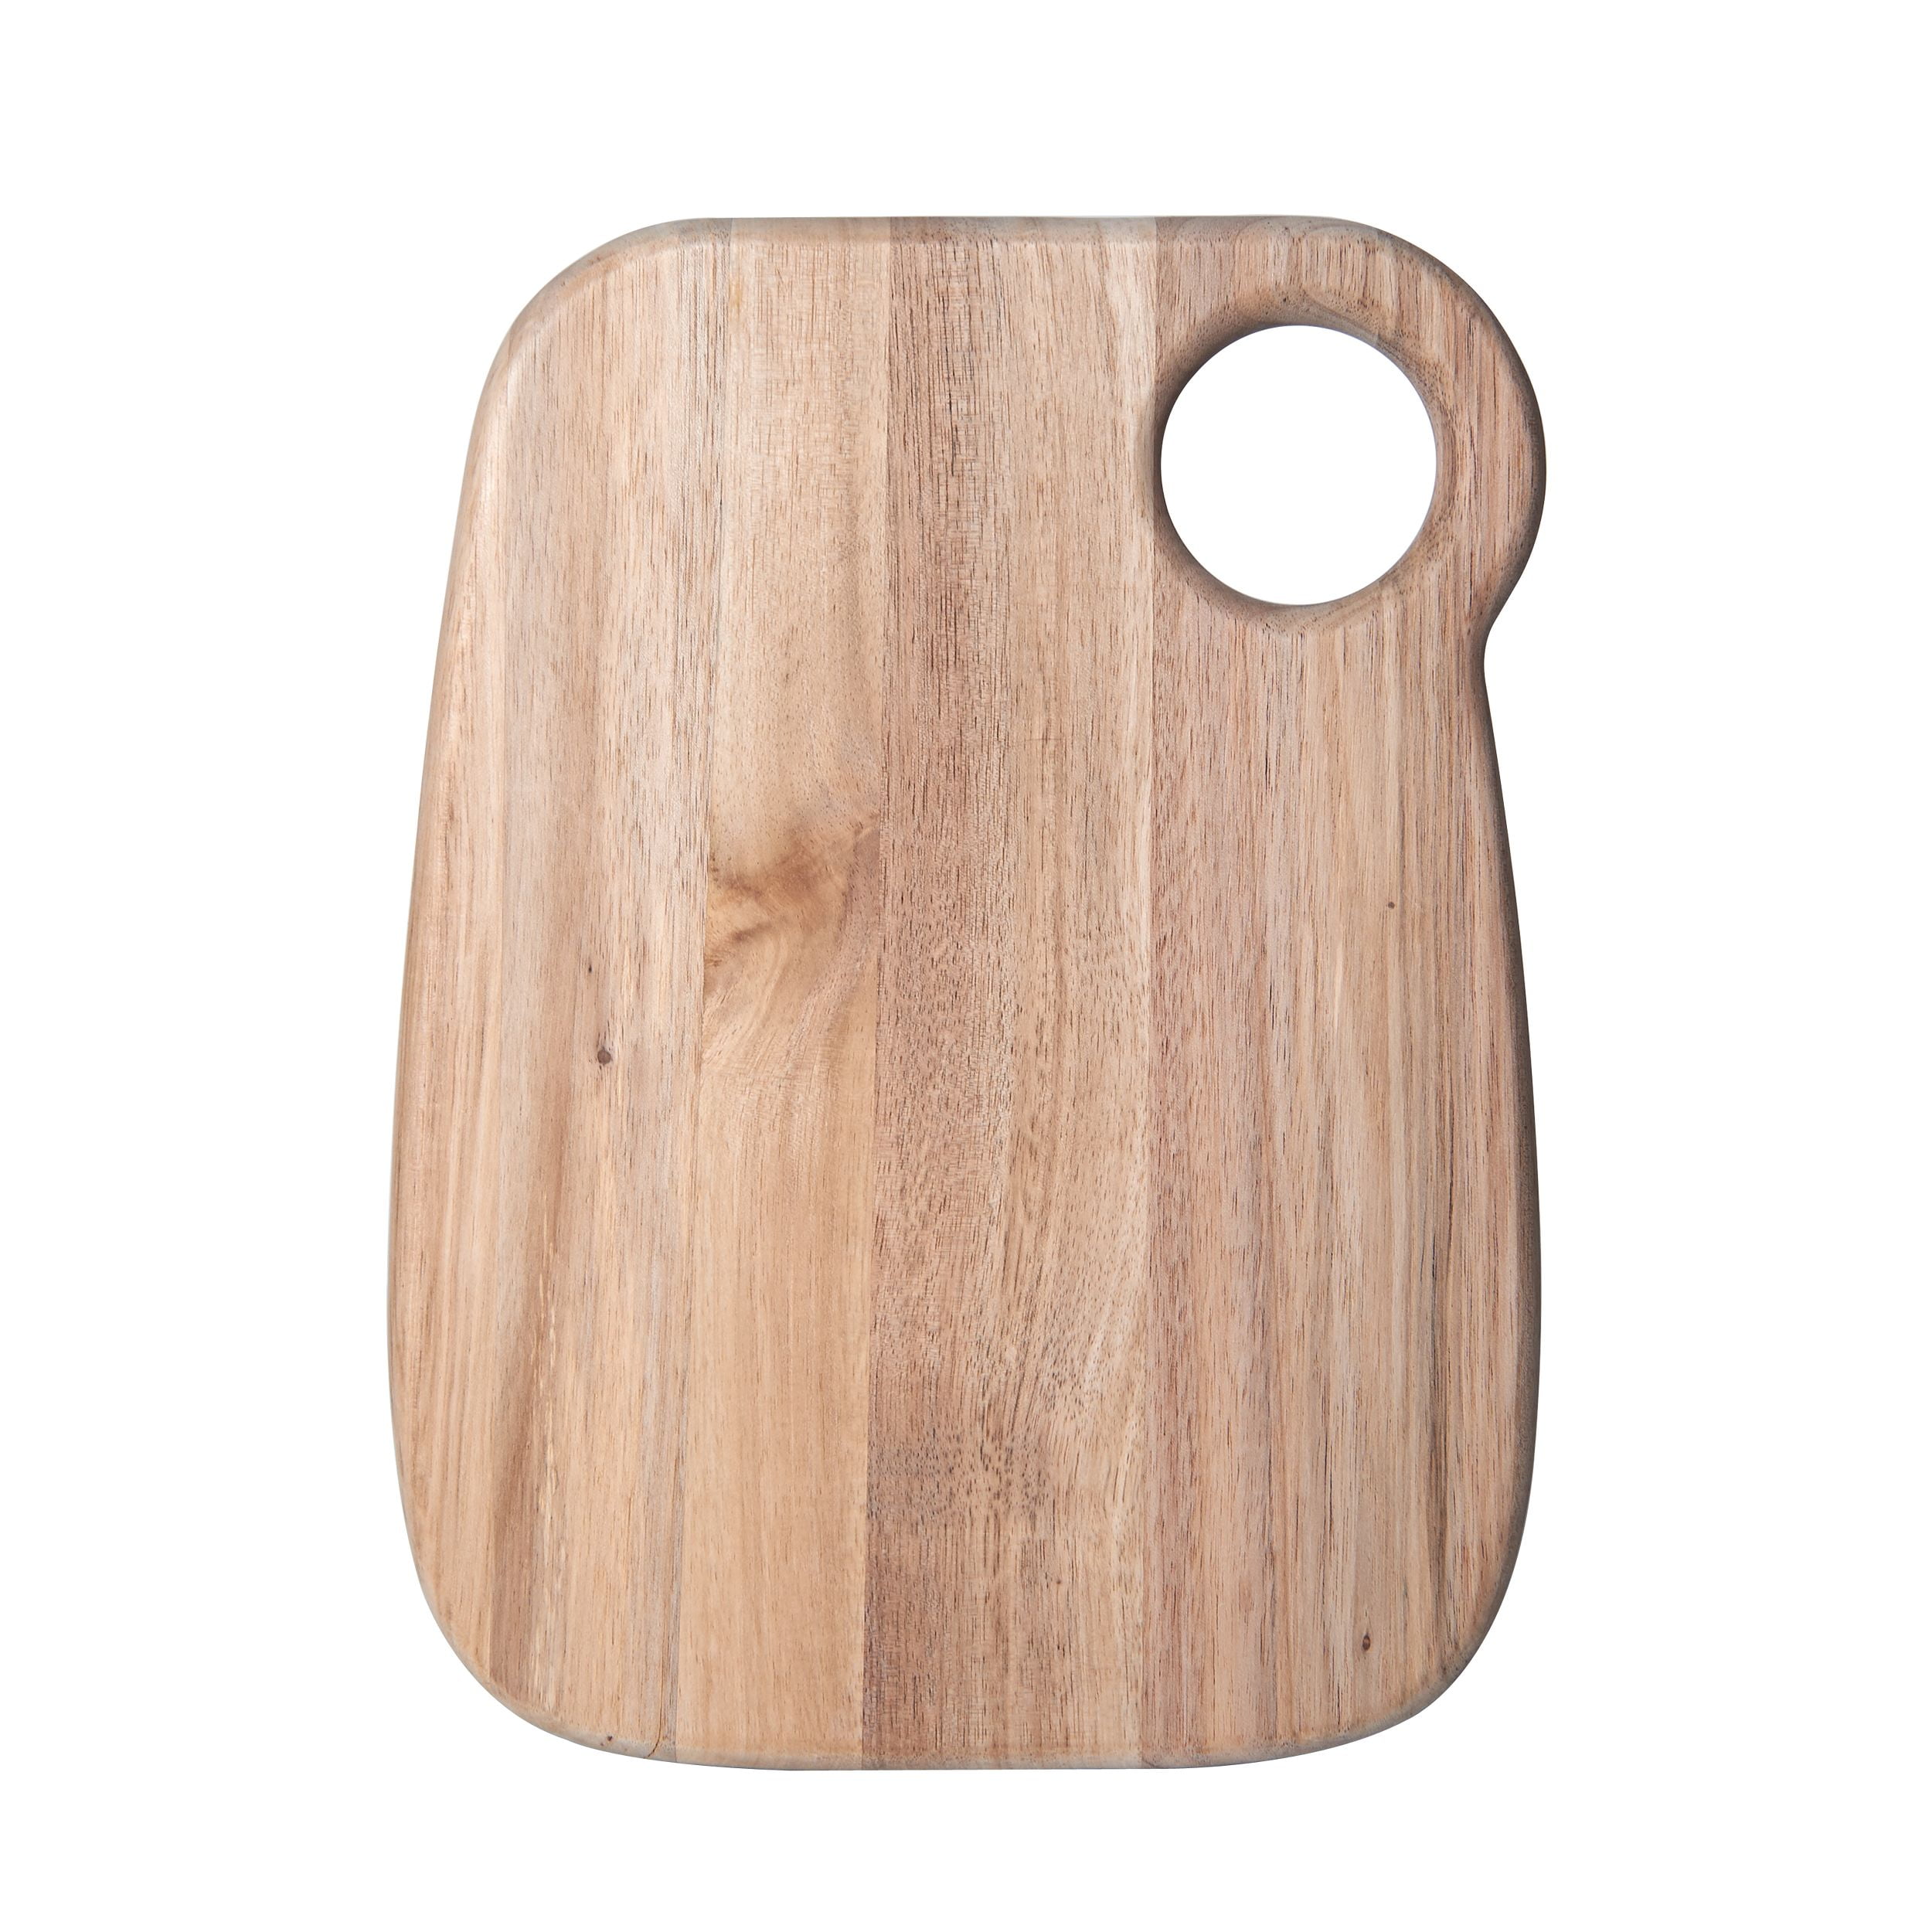 Kitsin Acacia Wood Cutting Board with Handle for Meat Bread Serving Small  Food Prepare, Rectangular Cheese Paddle,12.2 x 9 inch 